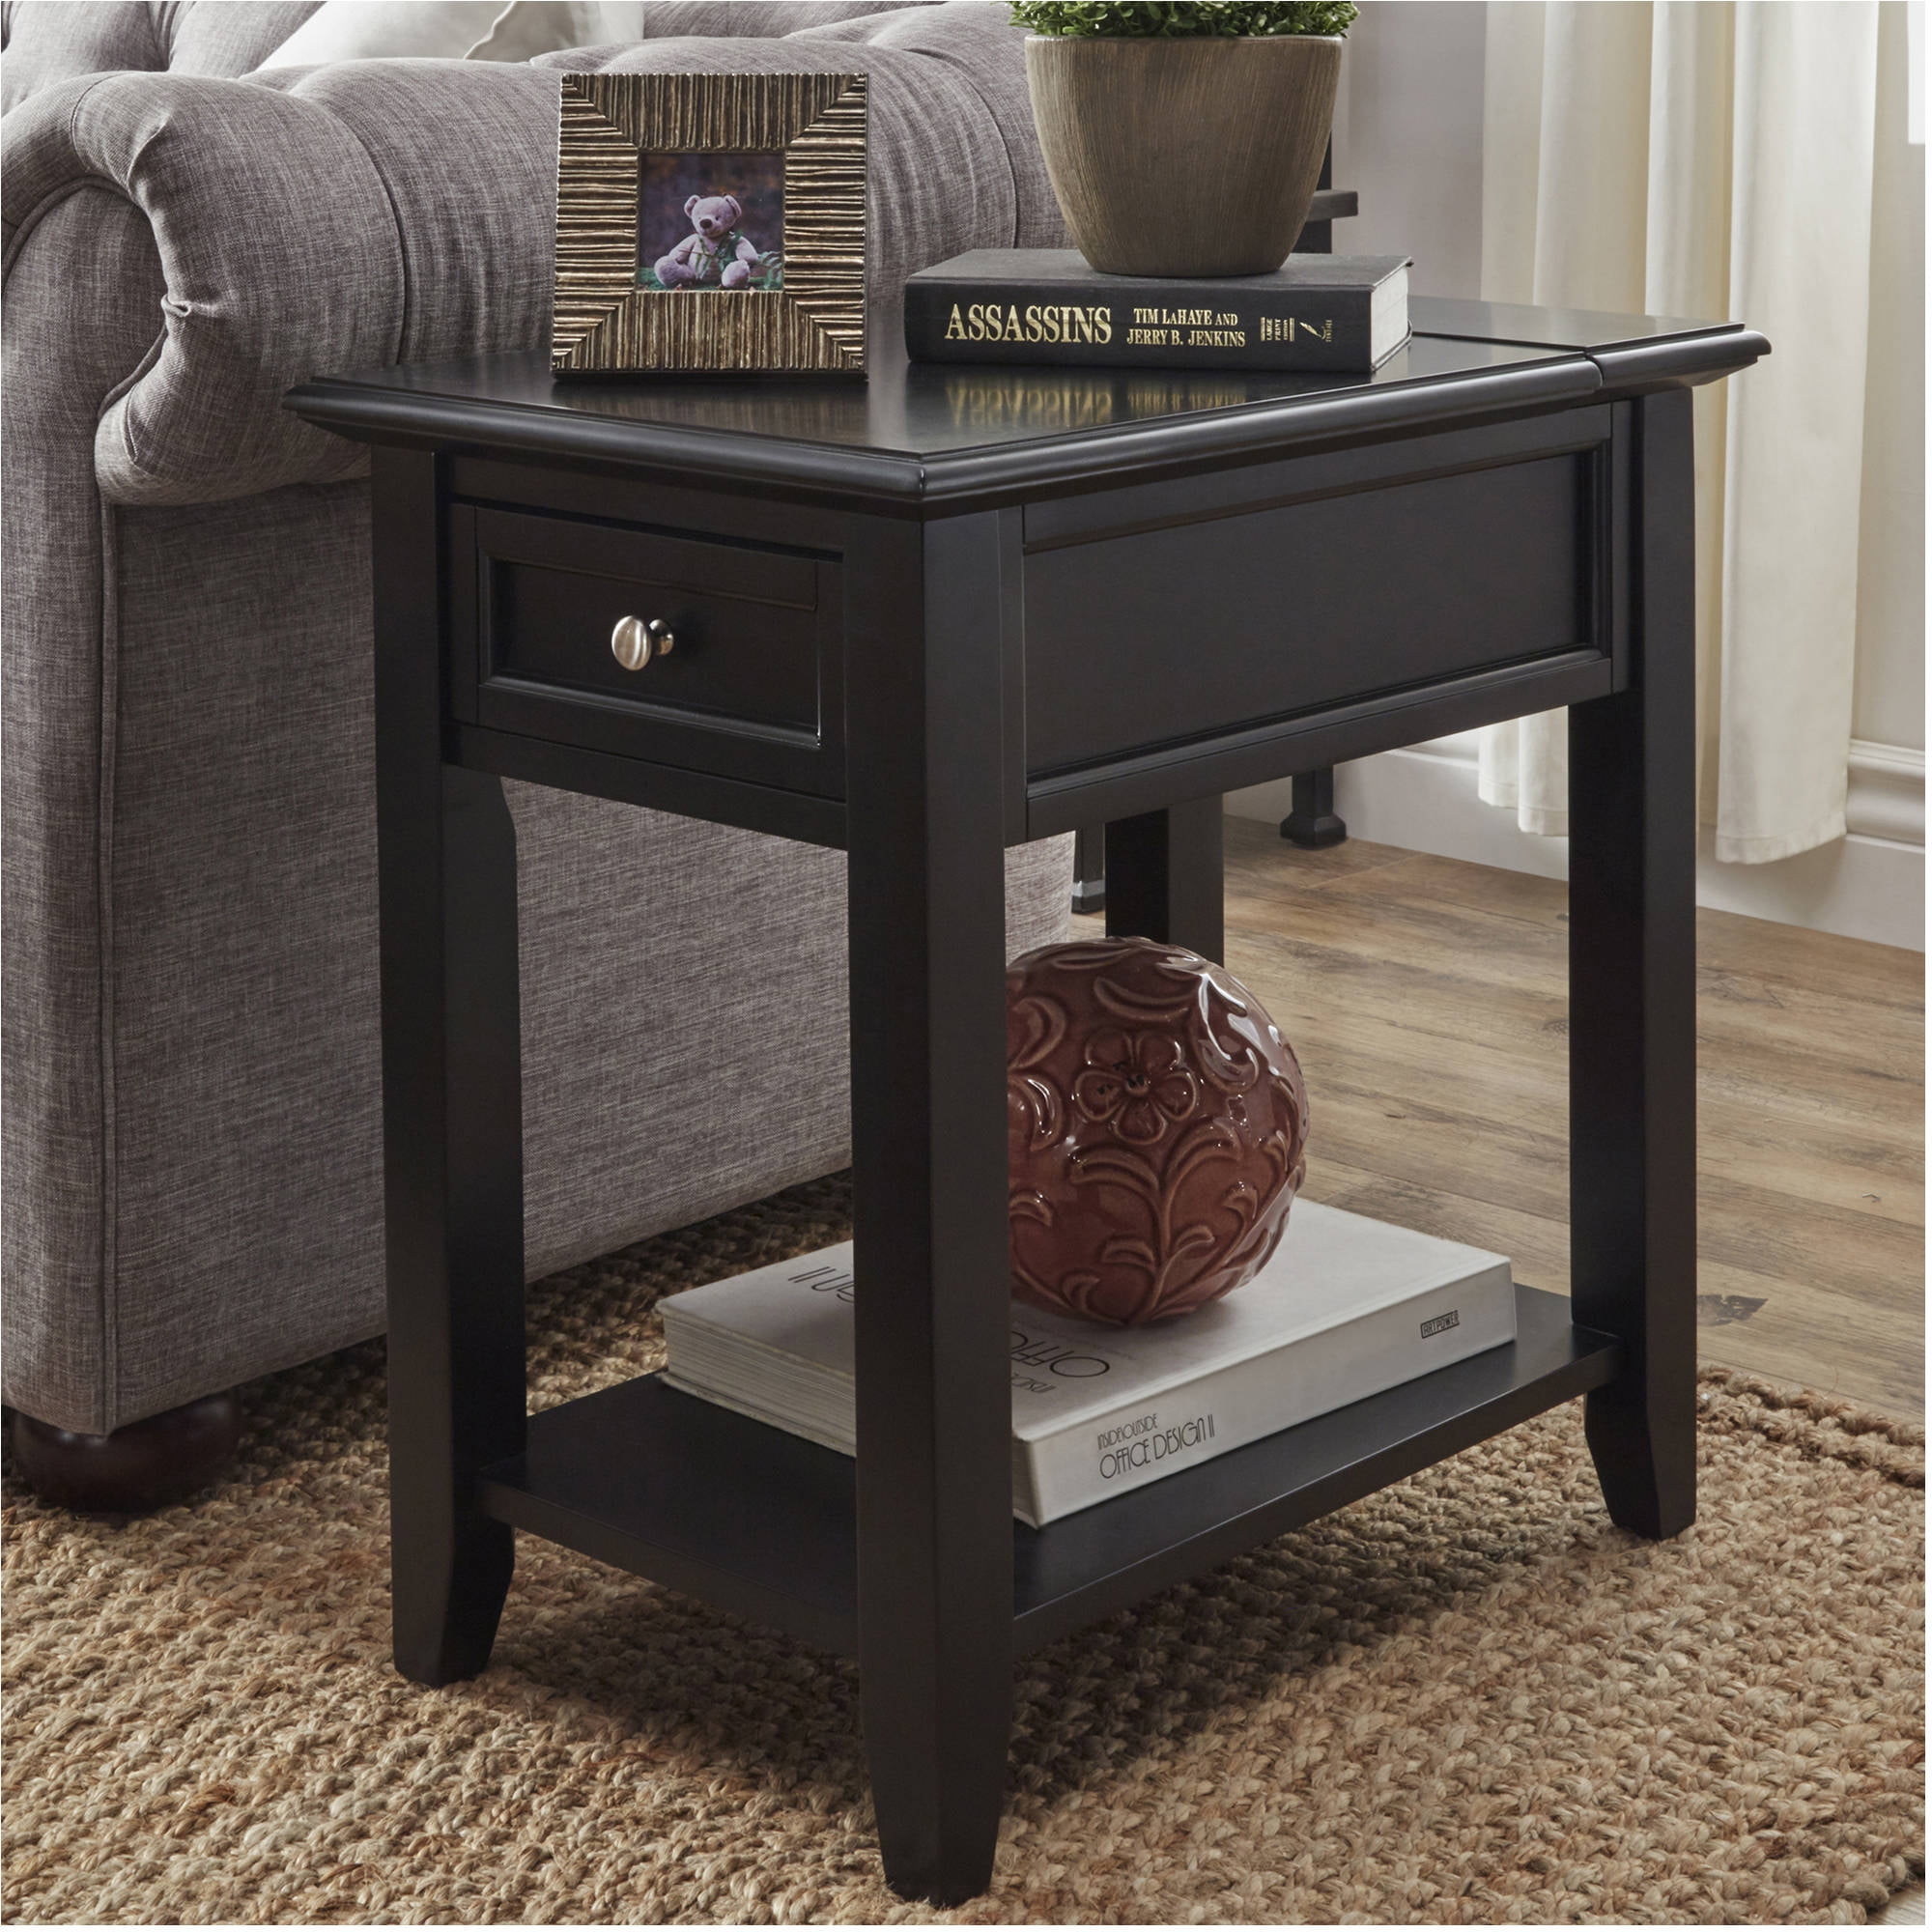 piek Ster sextant Chelsea Lane Wood 24" High End Table with One Drawer and Lift-top 3-Plug  Power Outlet, Vulcan Black - Walmart.com